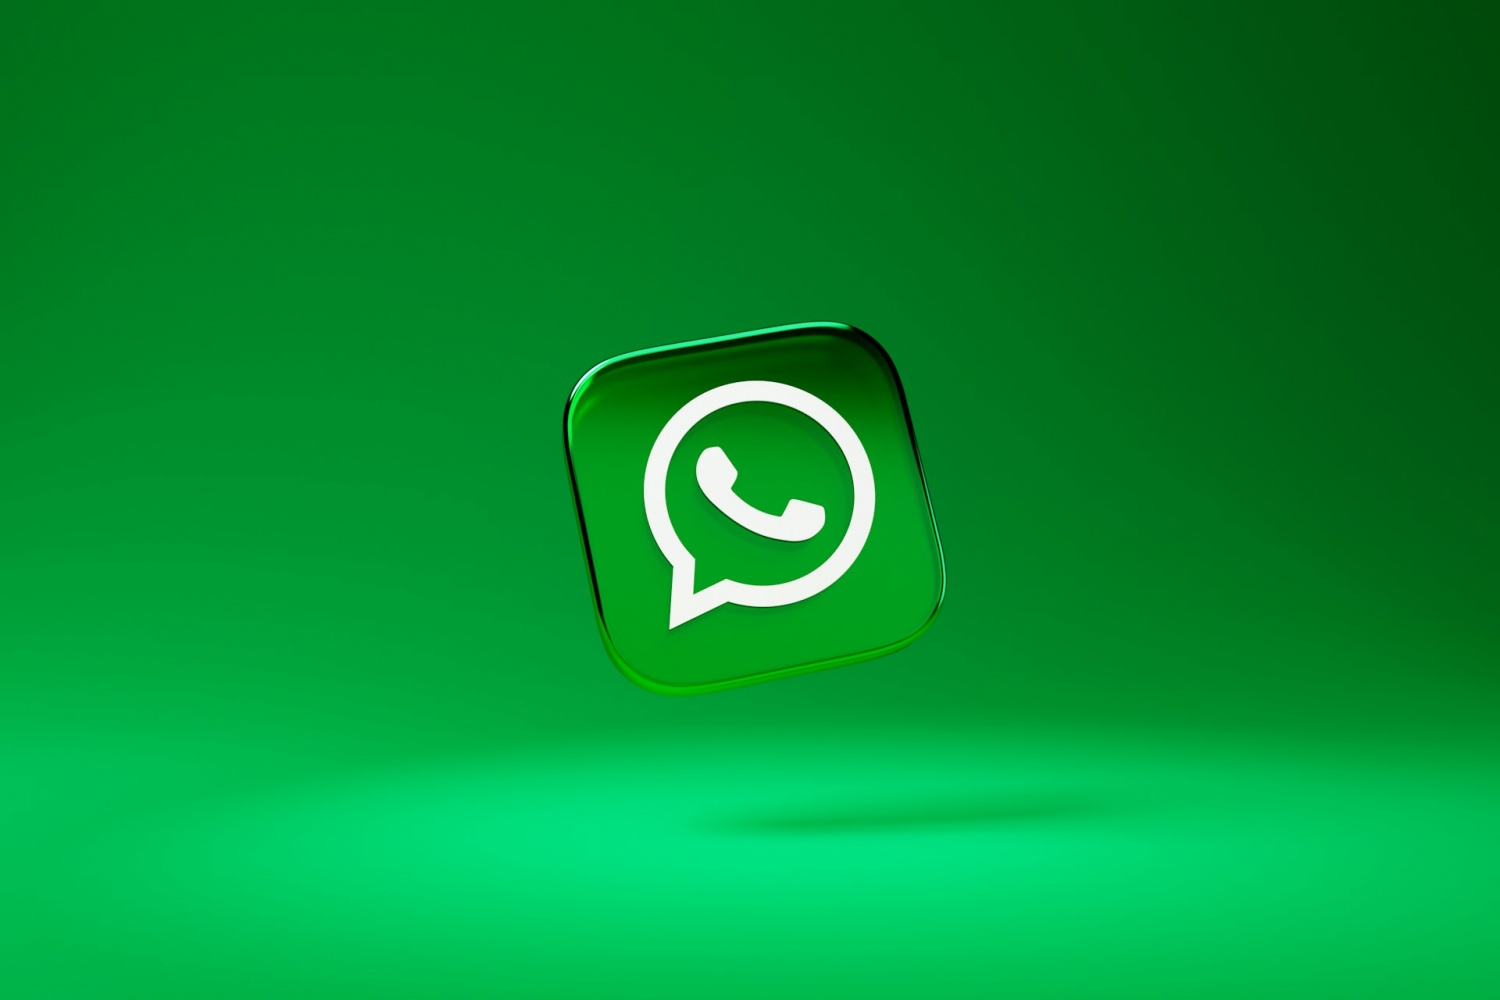 WhatsApp Users Complain About Controversial Design Change—How Minor is the Tweak?